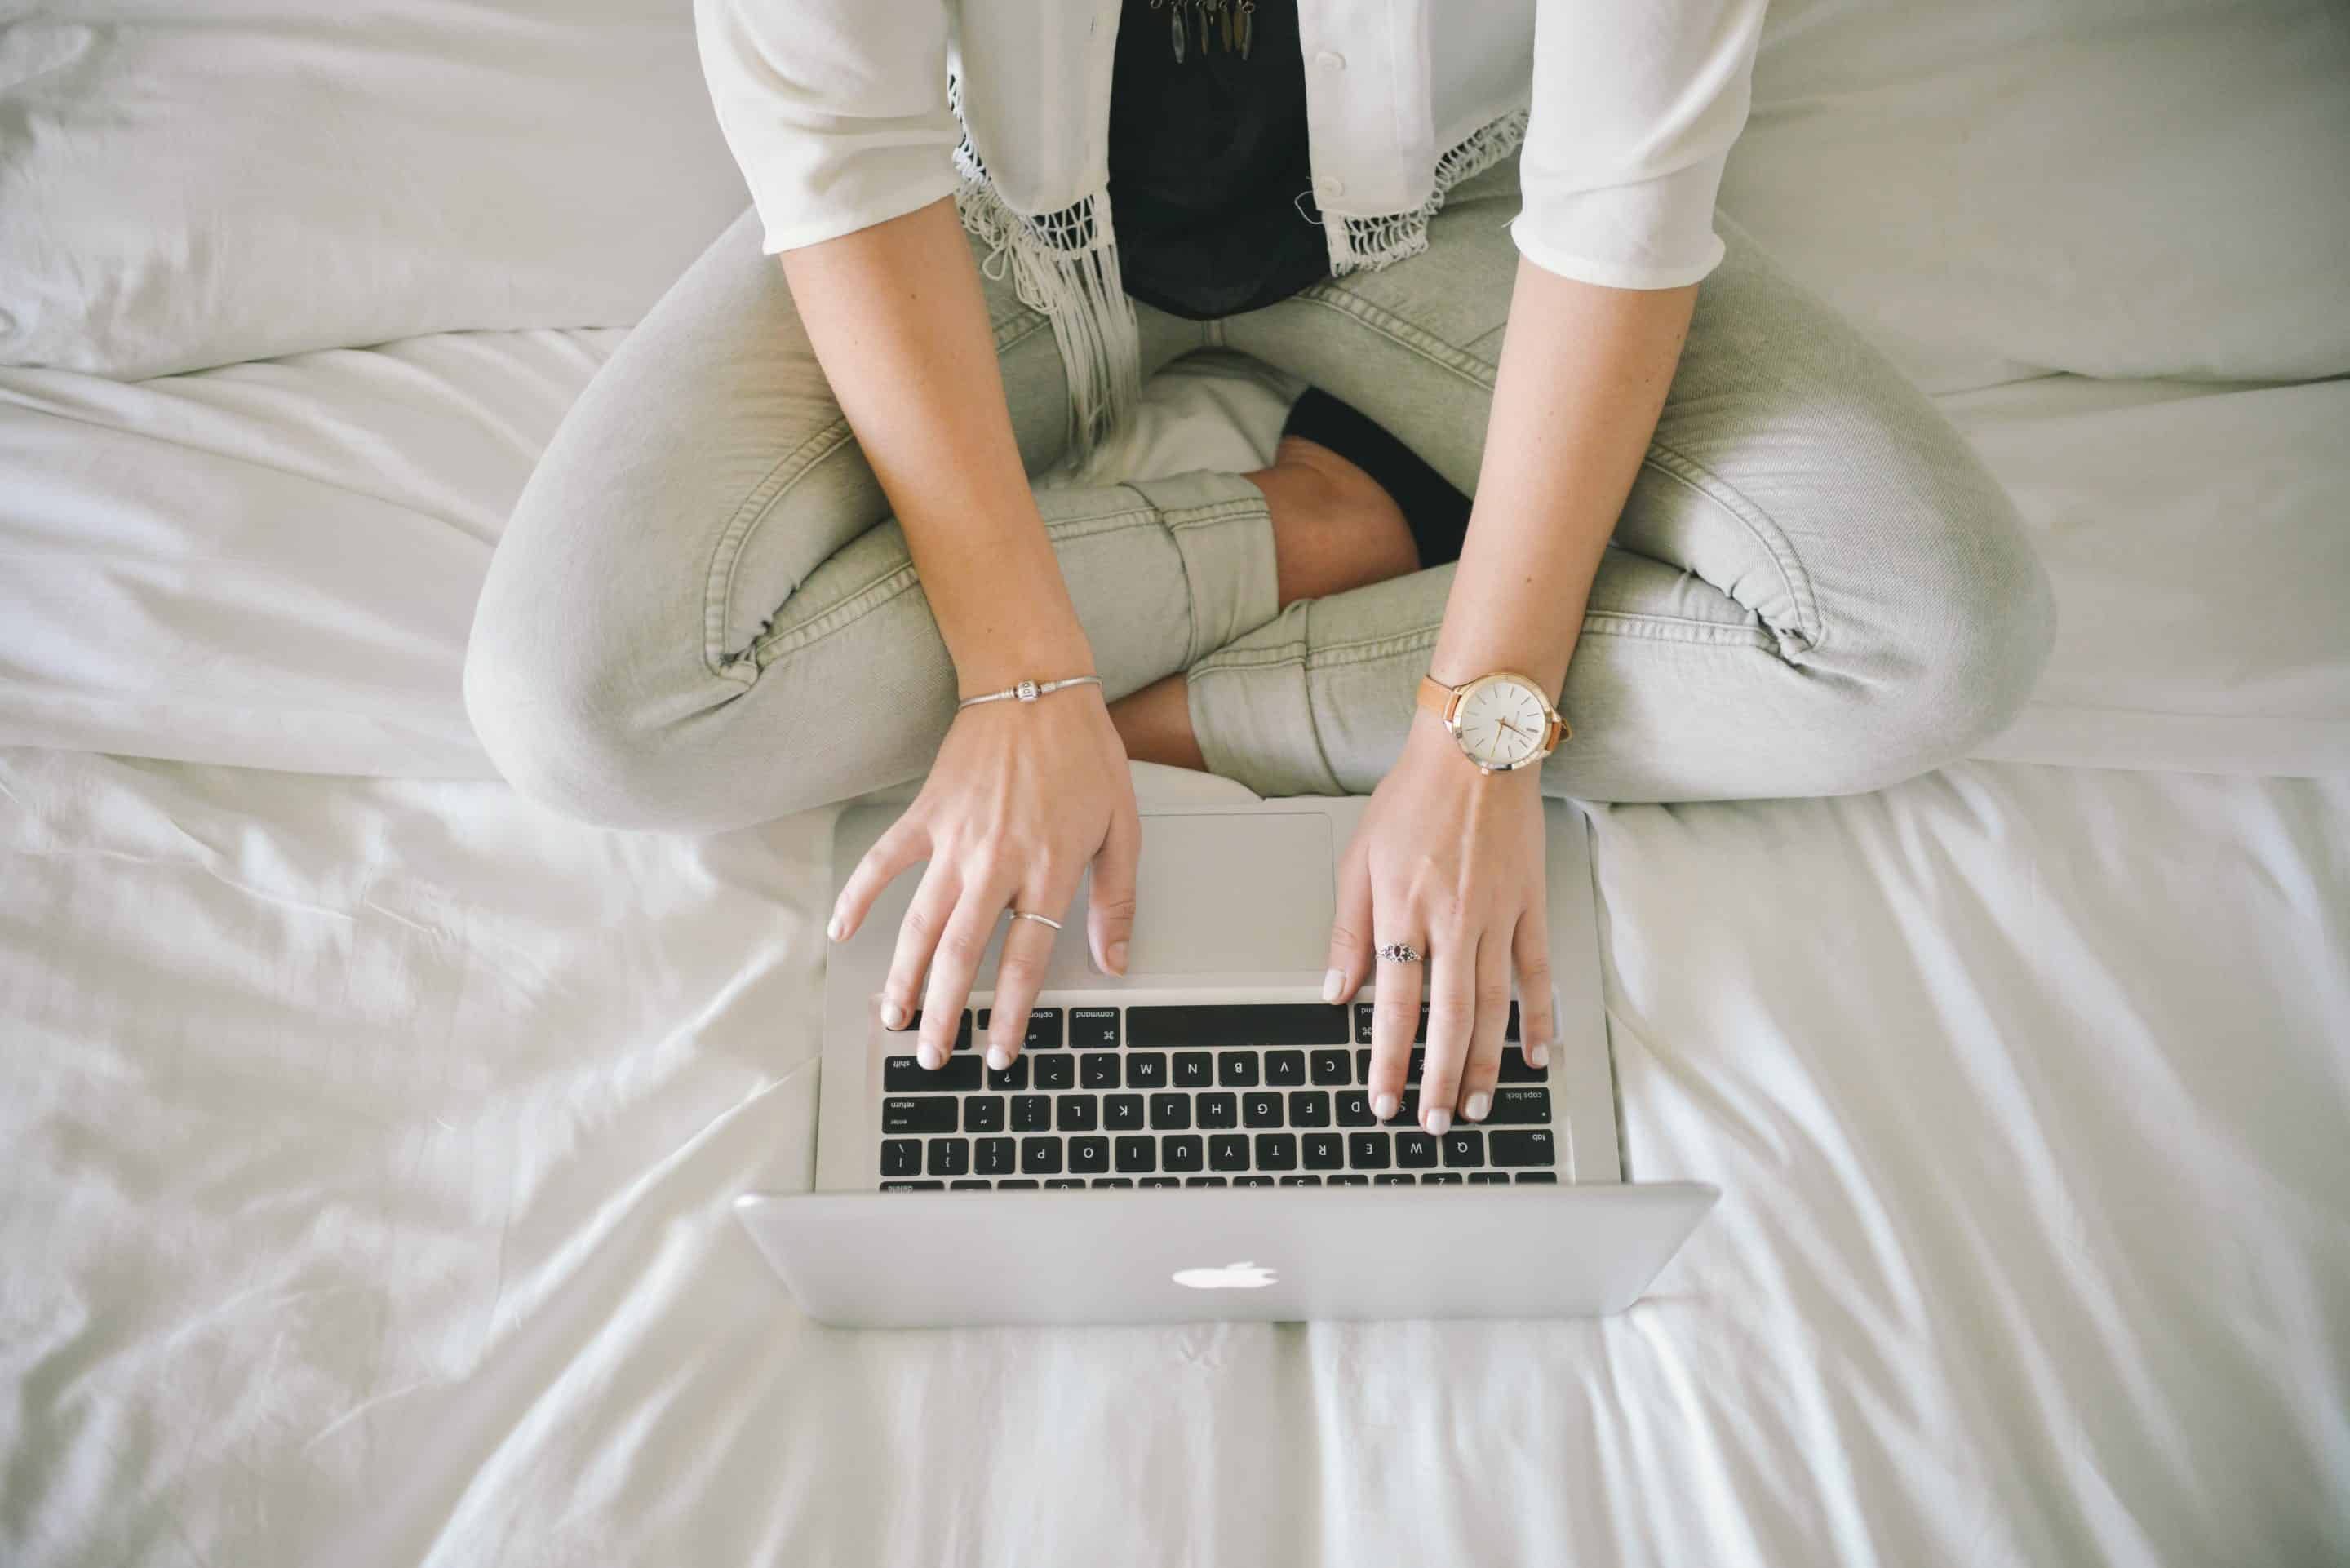 woman sitting cross-legged typing on a bed